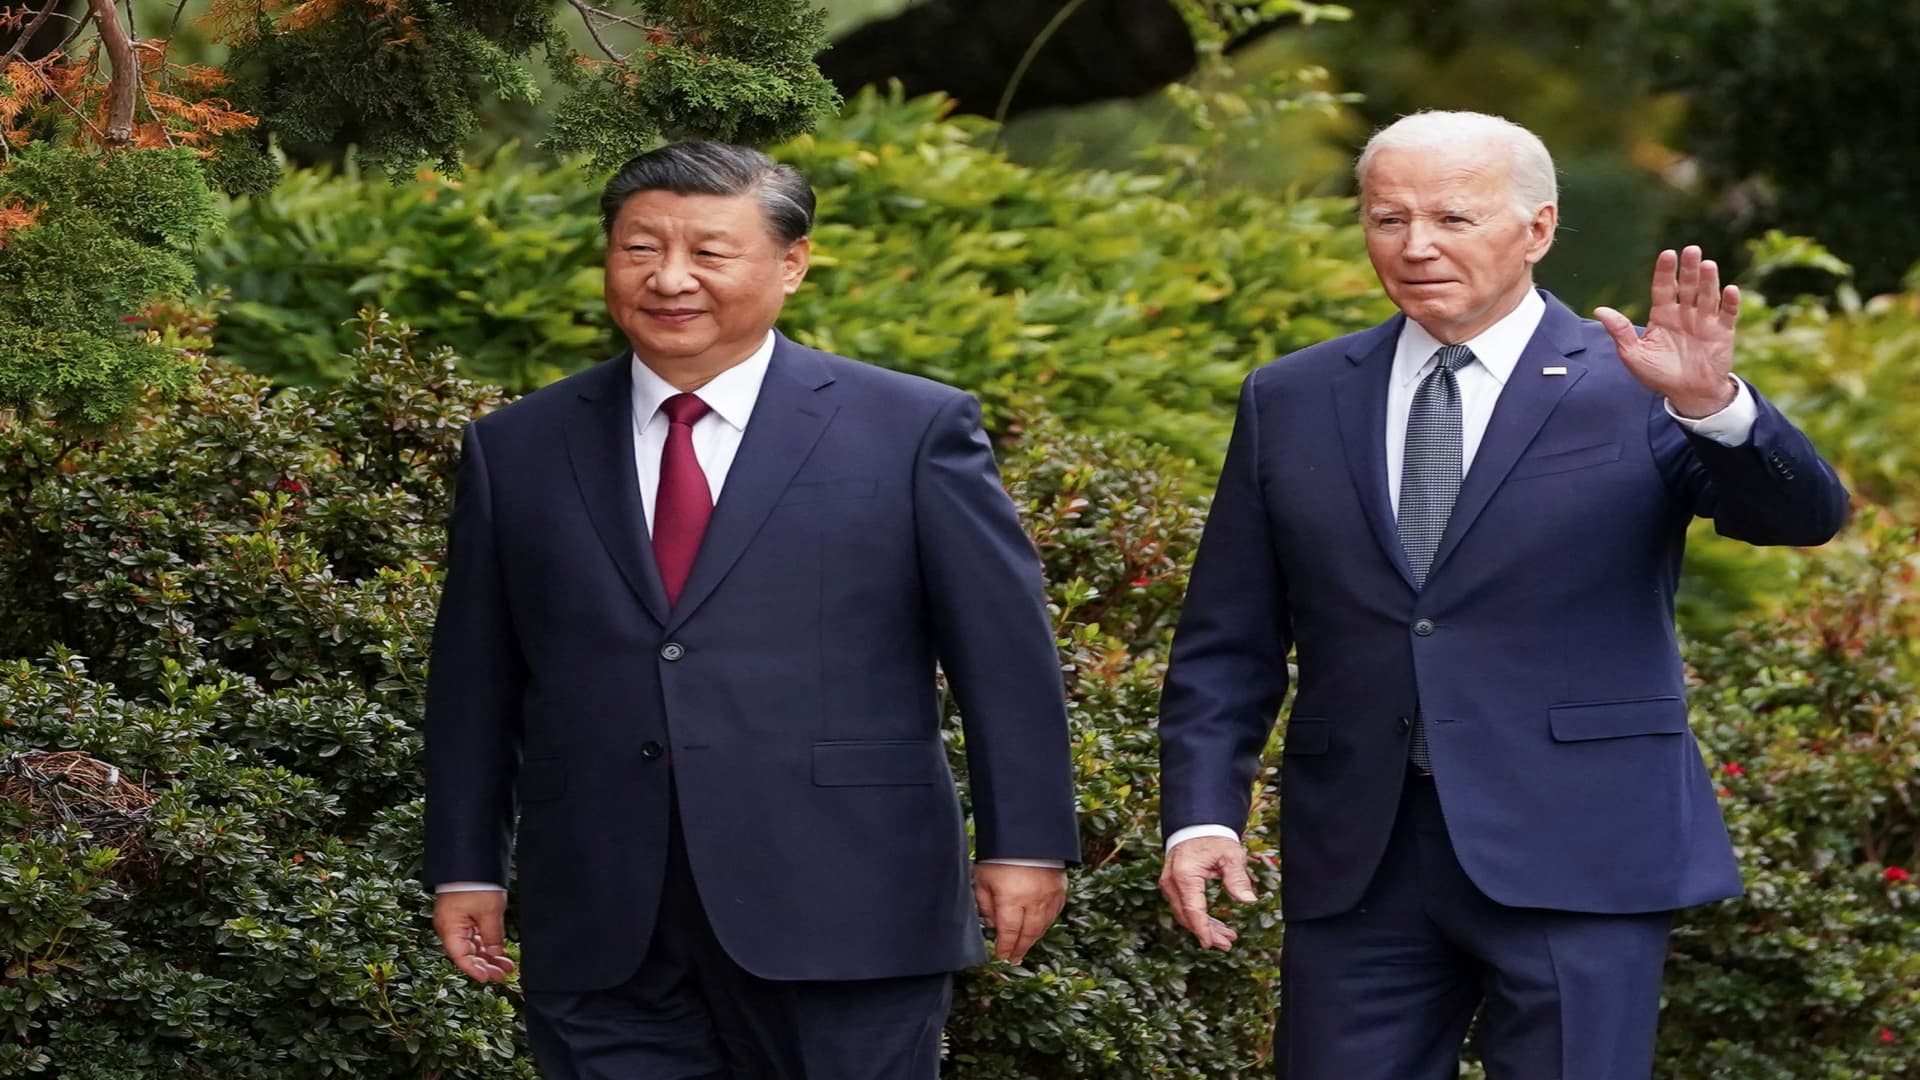 Biden and Xi’s assembly sent an significant signal for U.S. business in China